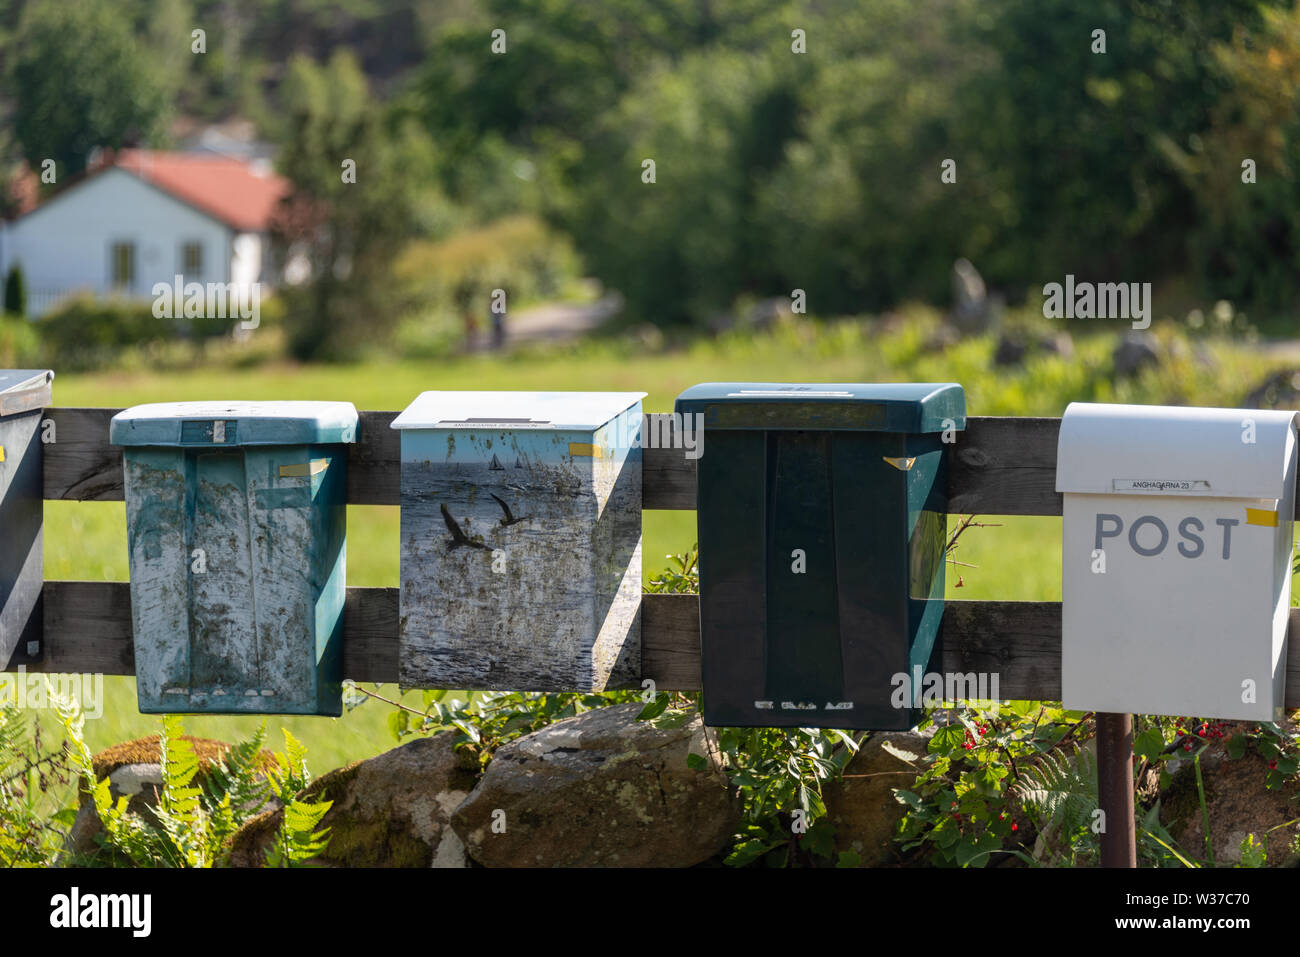 Resö, Sweden - July 10, 2019: Typical mailboxes in Sweden. Stock Photo